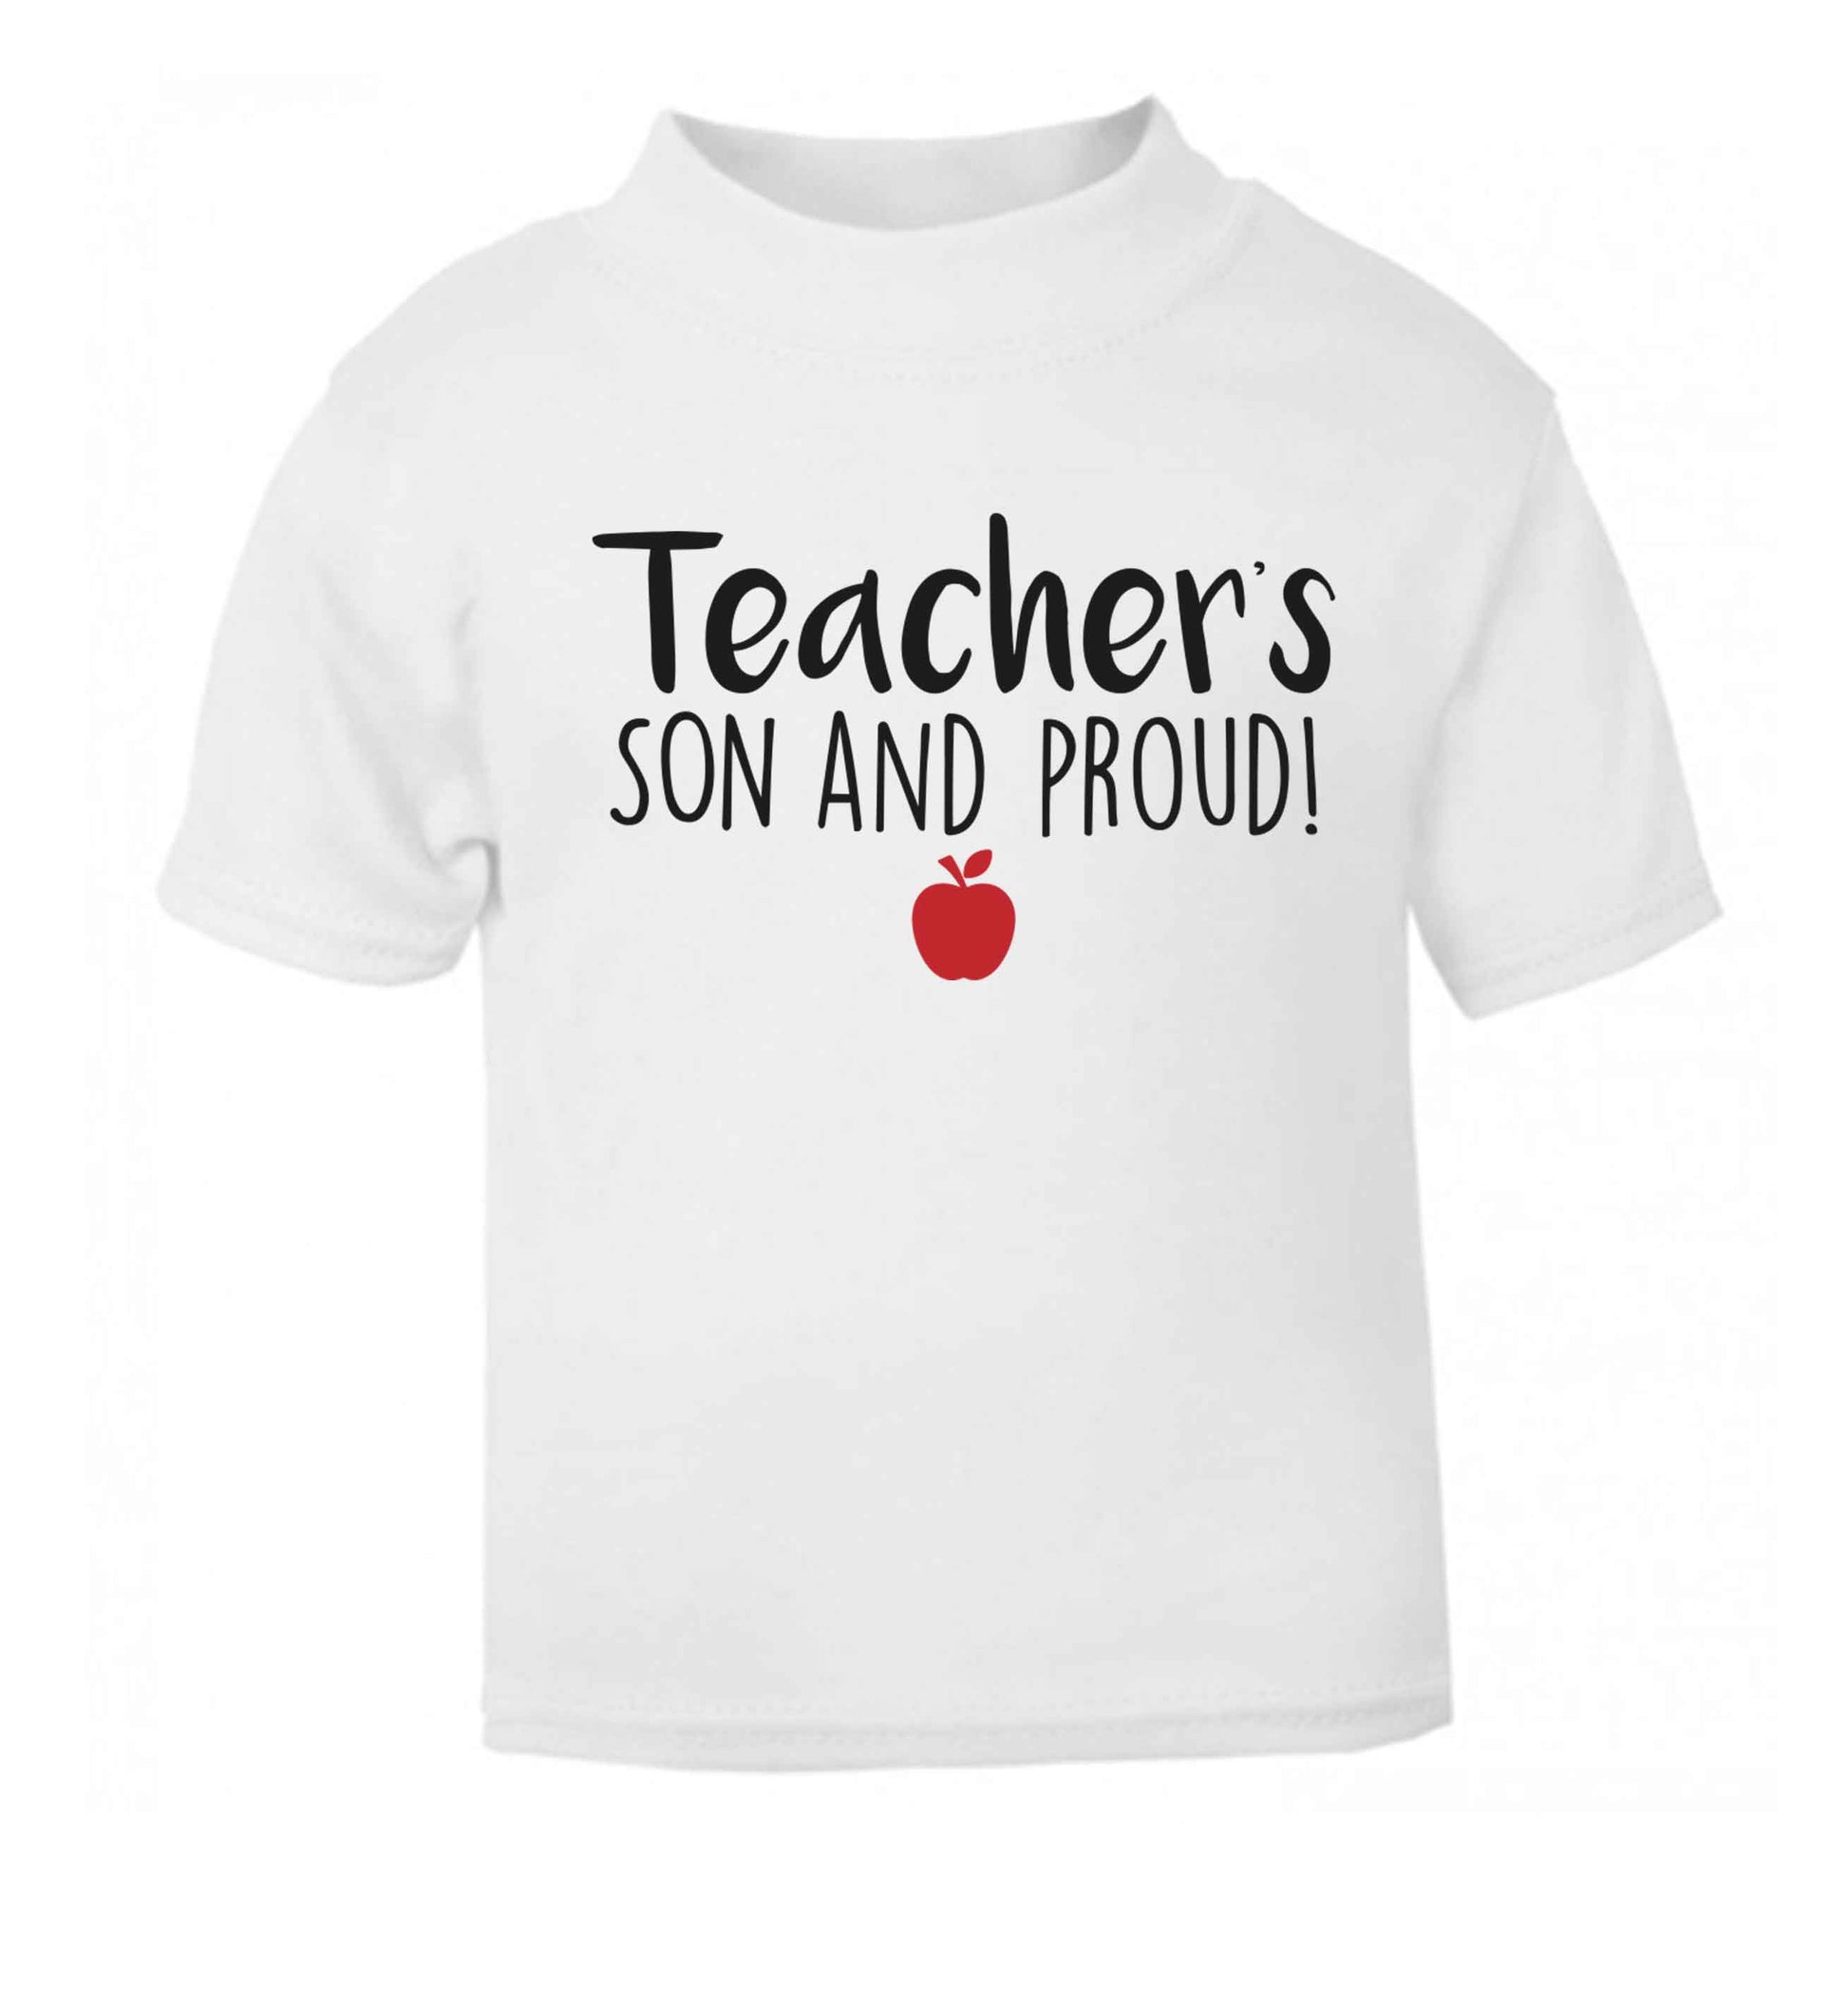 Teachers son and proud white baby toddler Tshirt 2 Years